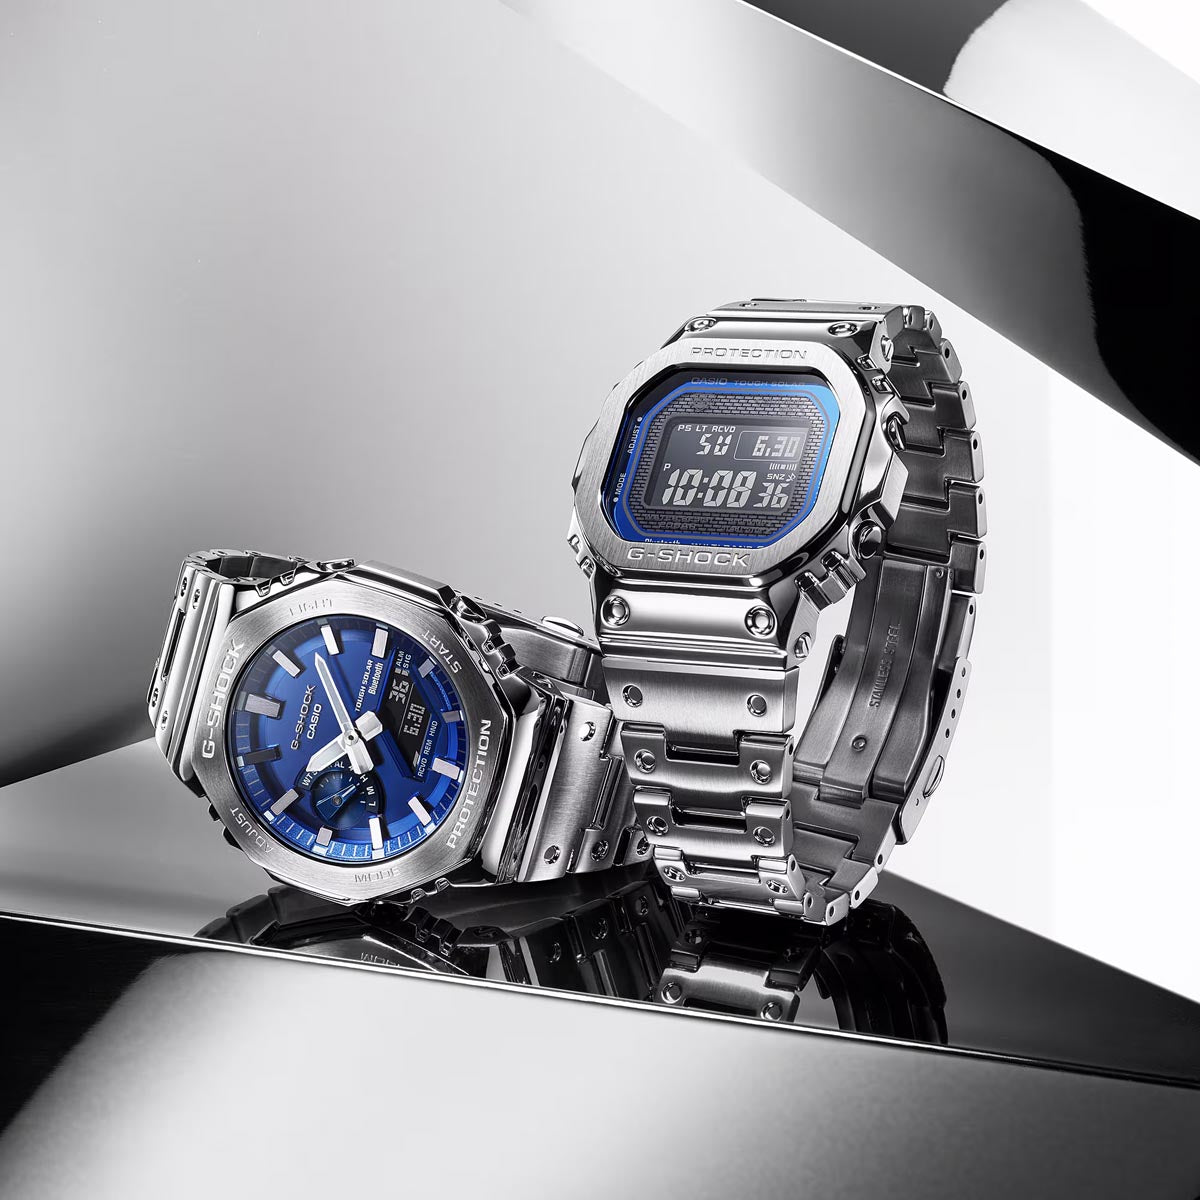 G-Shock 2100 Series Full Metal Mens Watch with Blue Dial and Stainless Steel Bracelet (solar movement)